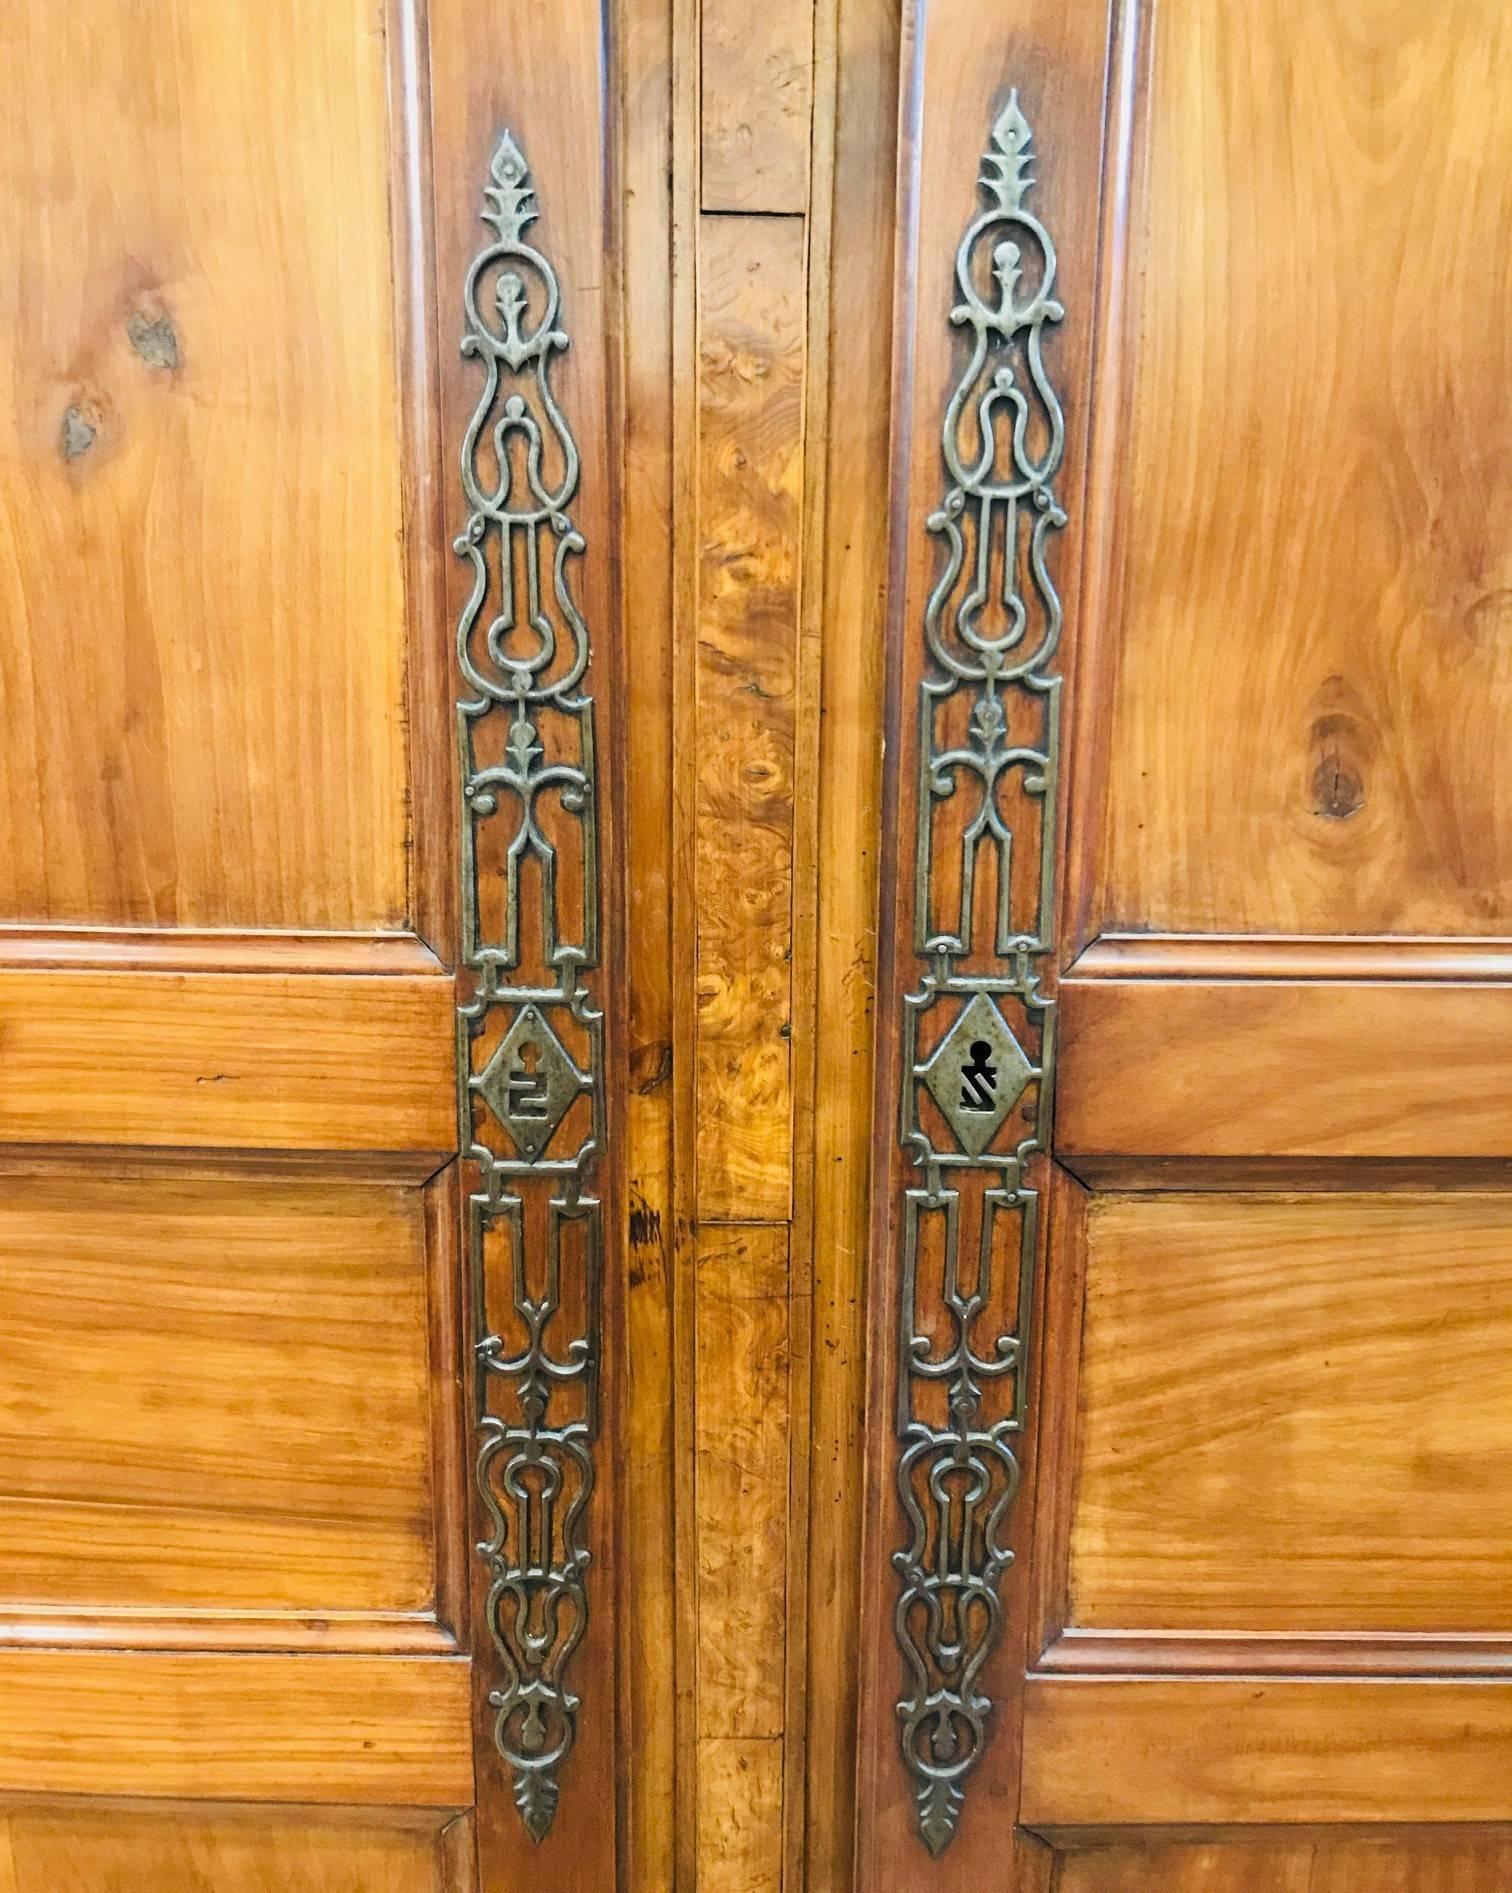 Particularly fine 19th century, French cherrywood armoire or wardrobe from Saintonge.

The serpentine-shaped and marquetry inlaid bonnet above two doors with hand-wrought filigree escutcheons separated by a thin strip of burled wood. 

The skirt